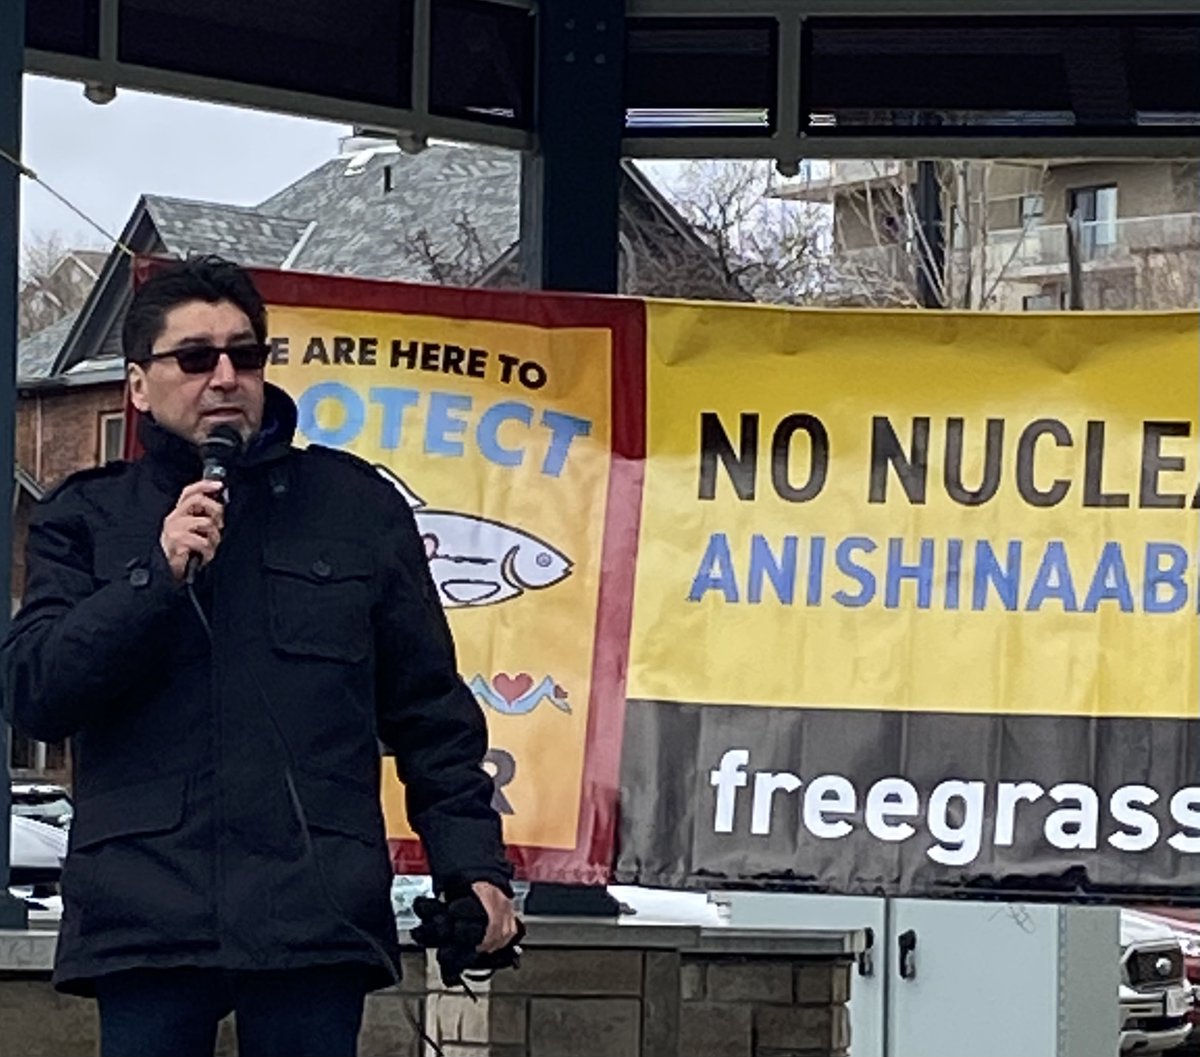 'We vehemently oppose the transportation of nuclear waste through our territories. This nuclear site cannot come at the cost of humanity.' - Wilfred King of Gull Bay 

#GrassyNarrows #FreeGrassy #LandAlliance #NoNuclearWaste